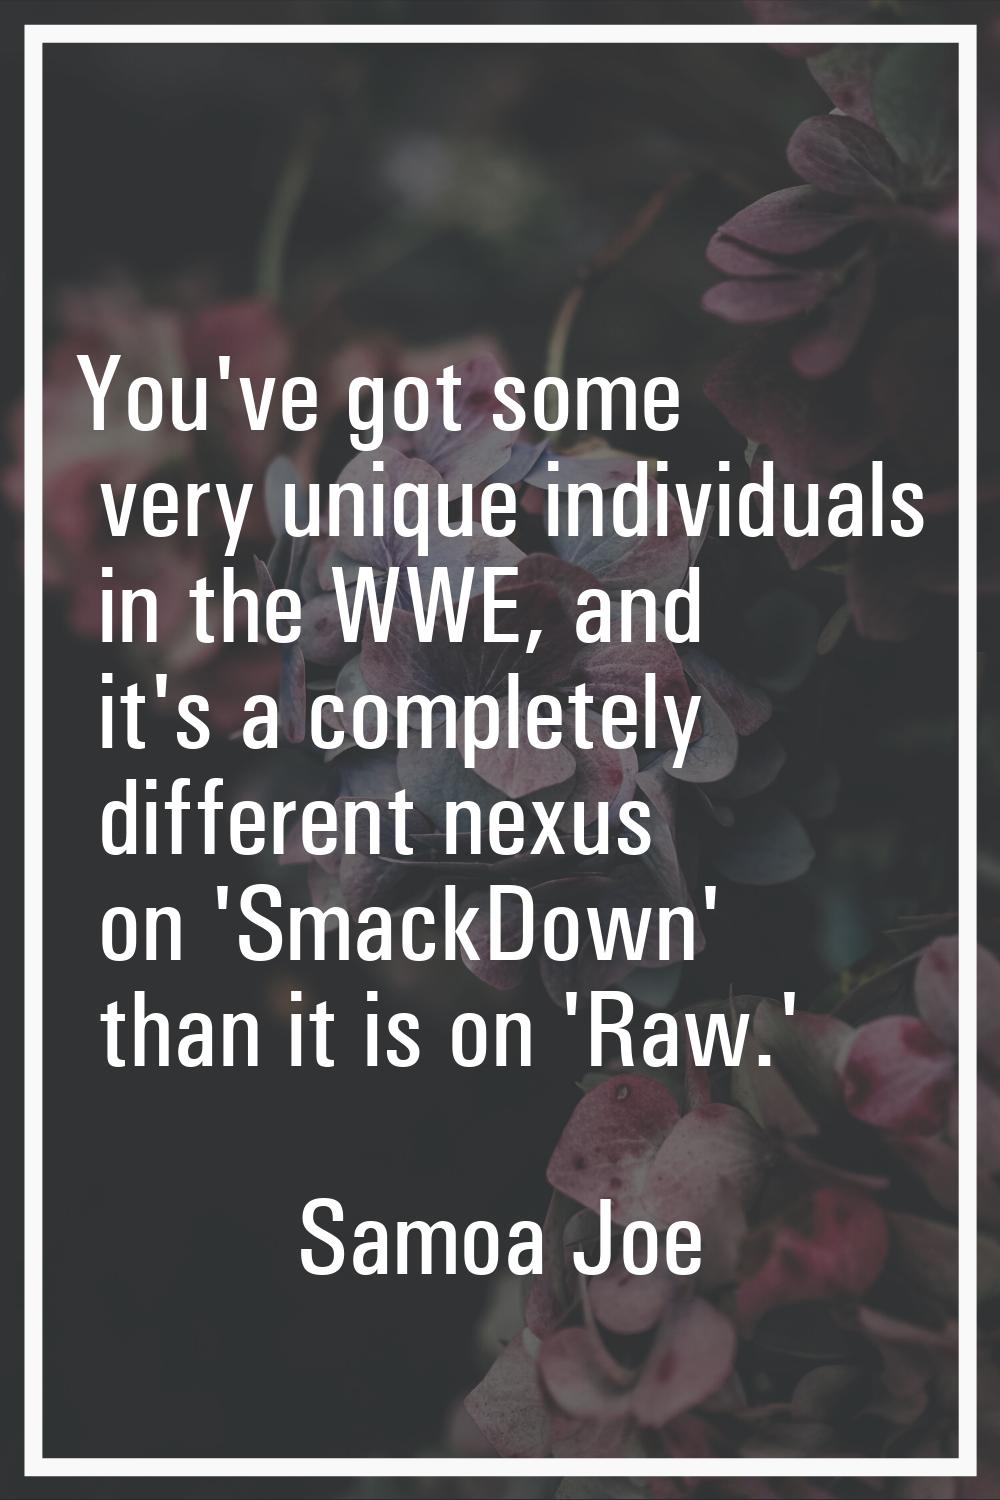 You've got some very unique individuals in the WWE, and it's a completely different nexus on 'Smack